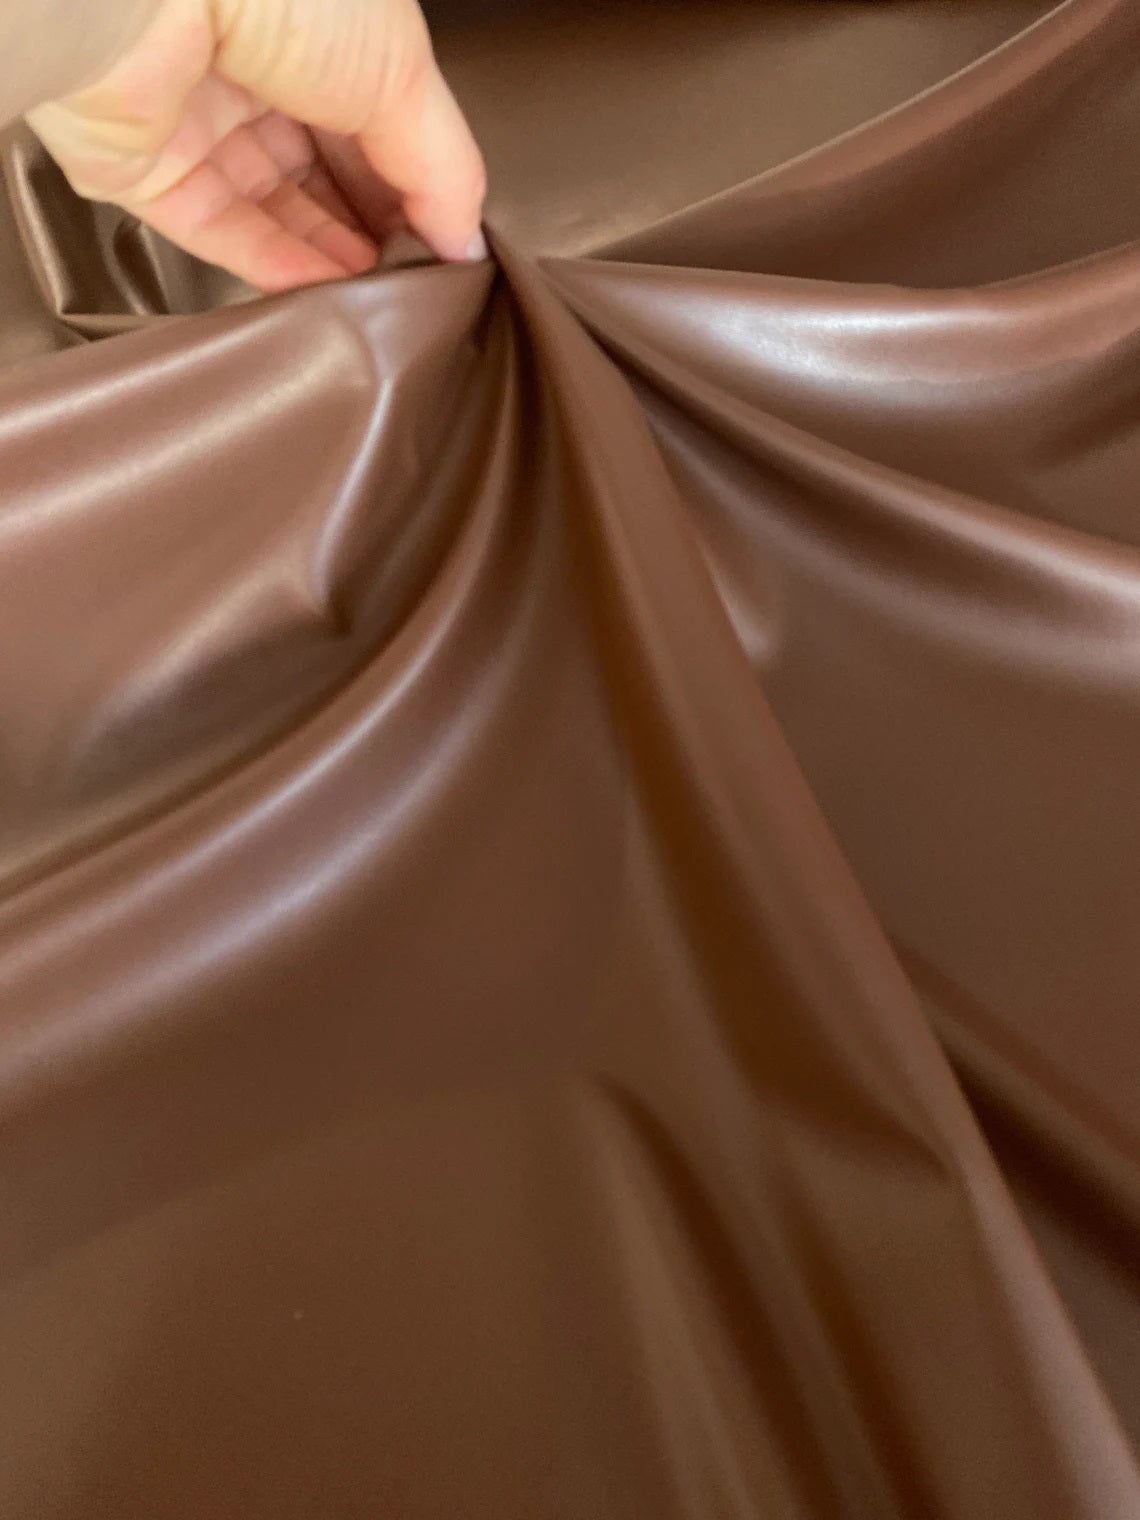 Chocolate stretch faux leather, Chocolate stretch pleather, Chocolate stretch soft vinyl, Chocolate stretch vinyl, faux leather stretch for clothing, Faux Leather for jackets, Faux Leather for bags, Faux Leather on discount, Faux Leather on sale, premium Faux Leather, dark brown Faux Leather, brown Faux Leather, Faux Leather for tops, Faux Leather for leggings